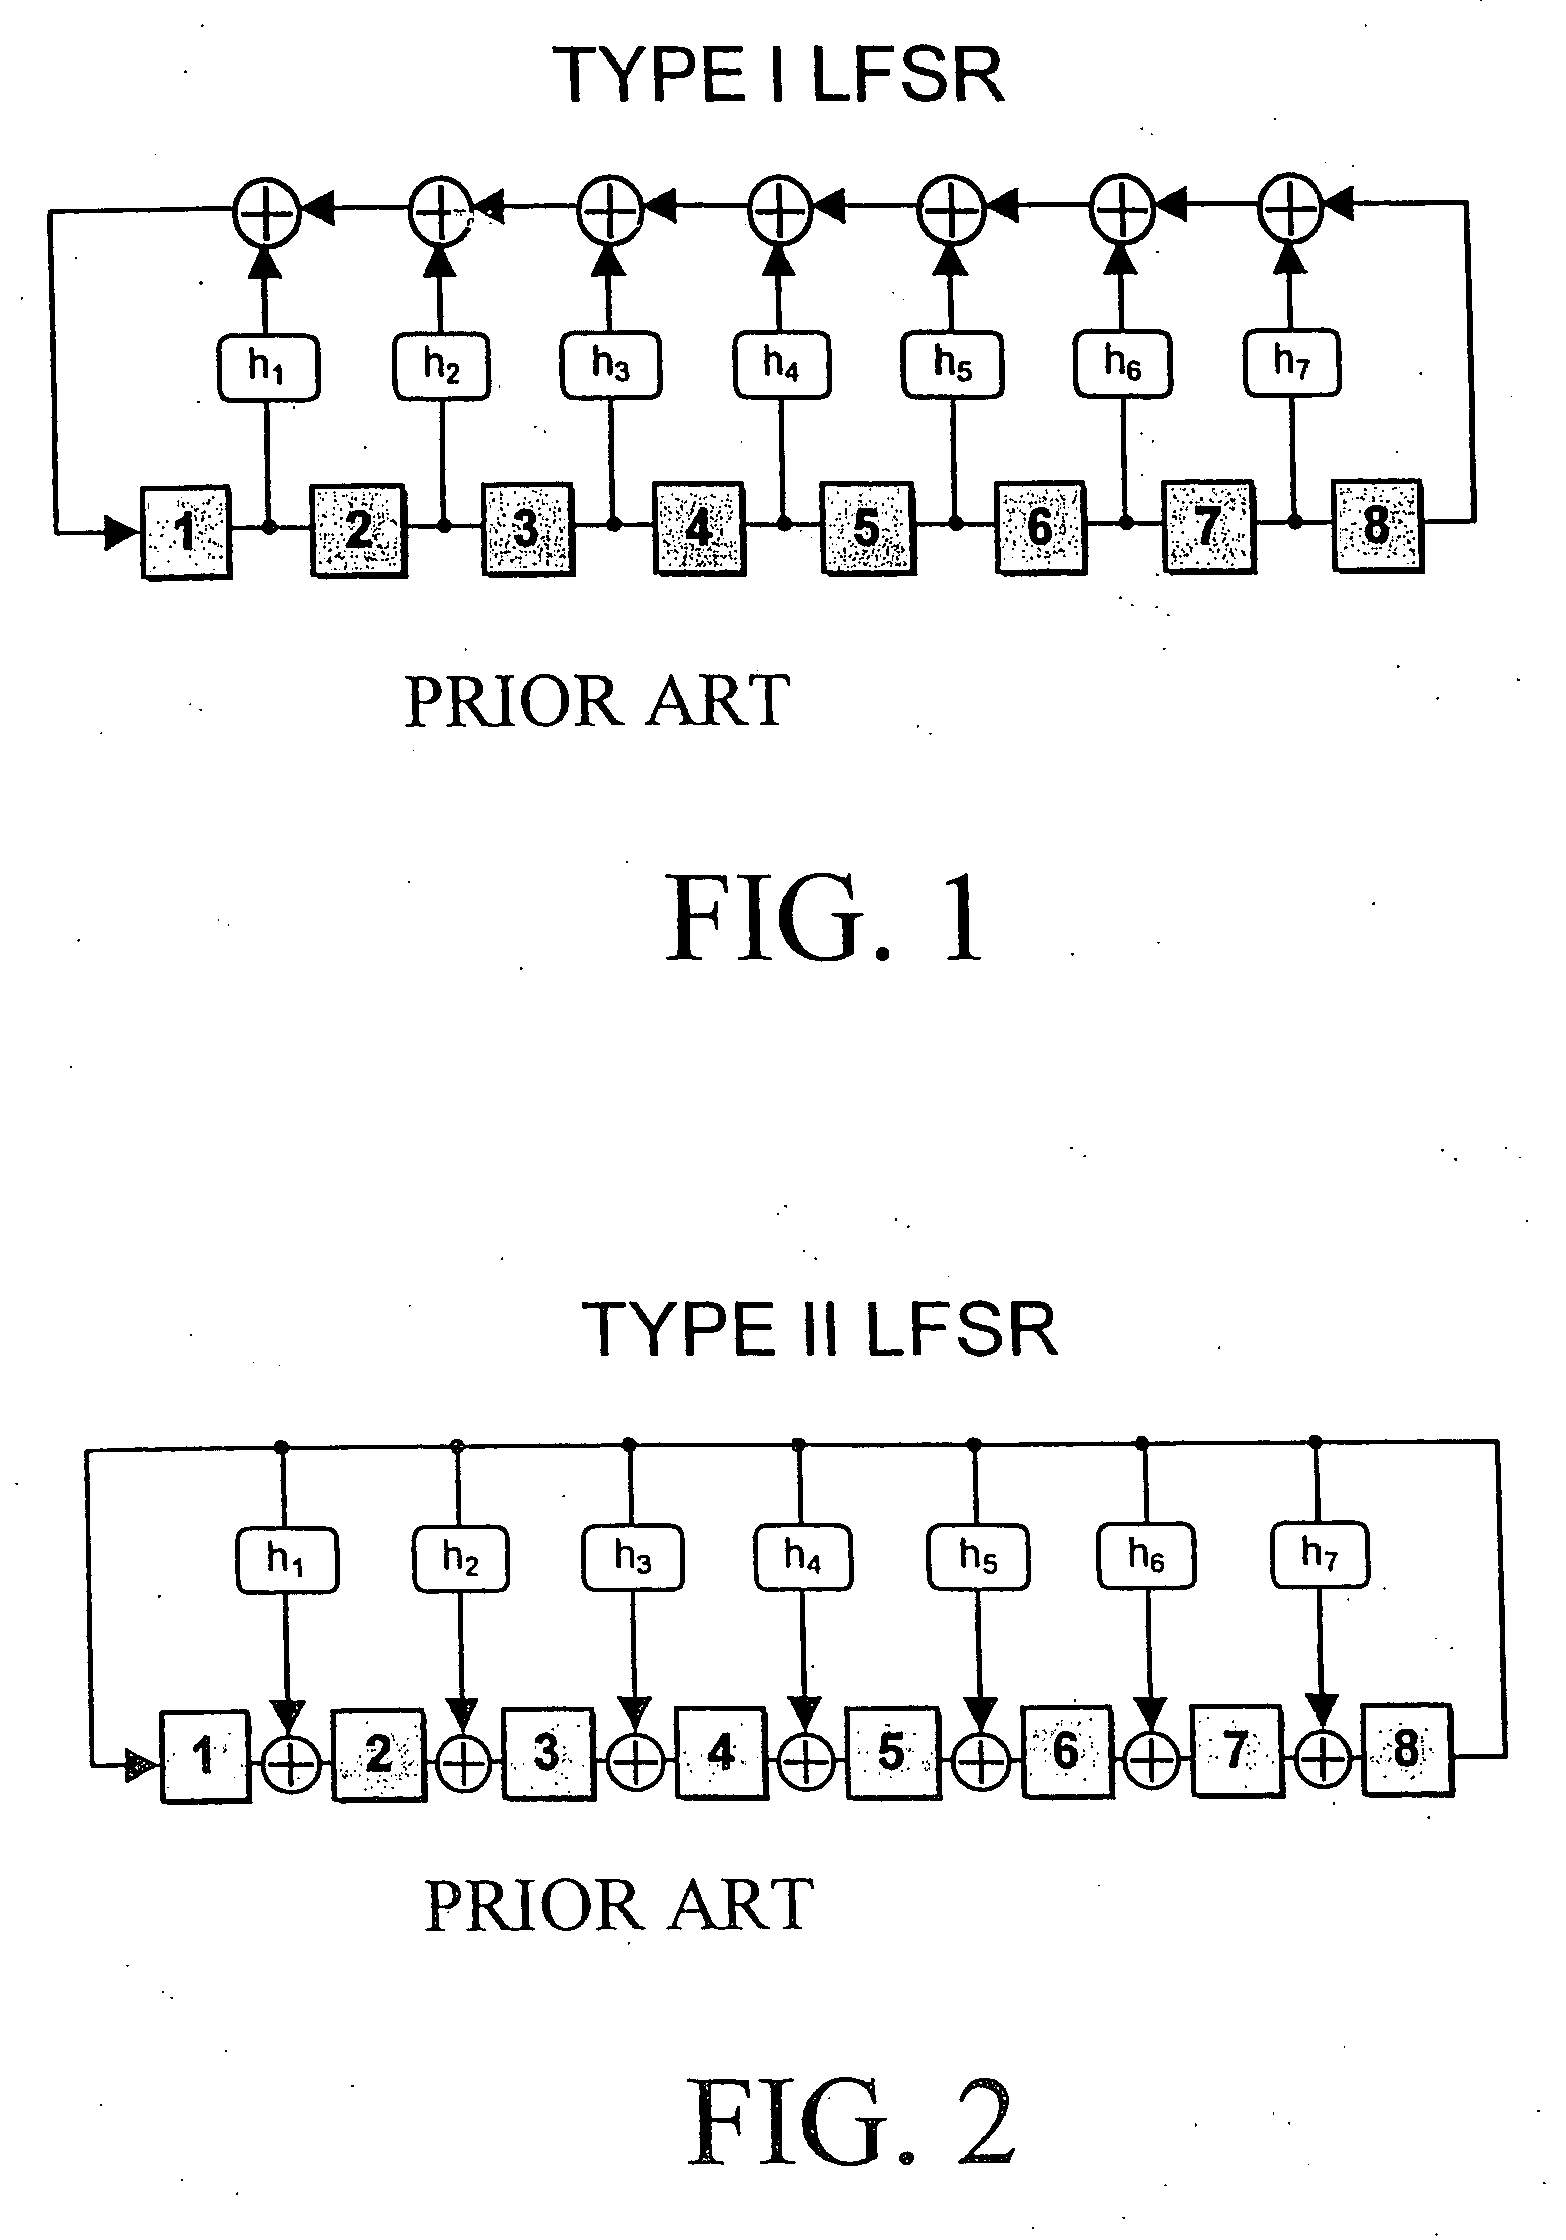 Method for synthesizing linear finite state machines